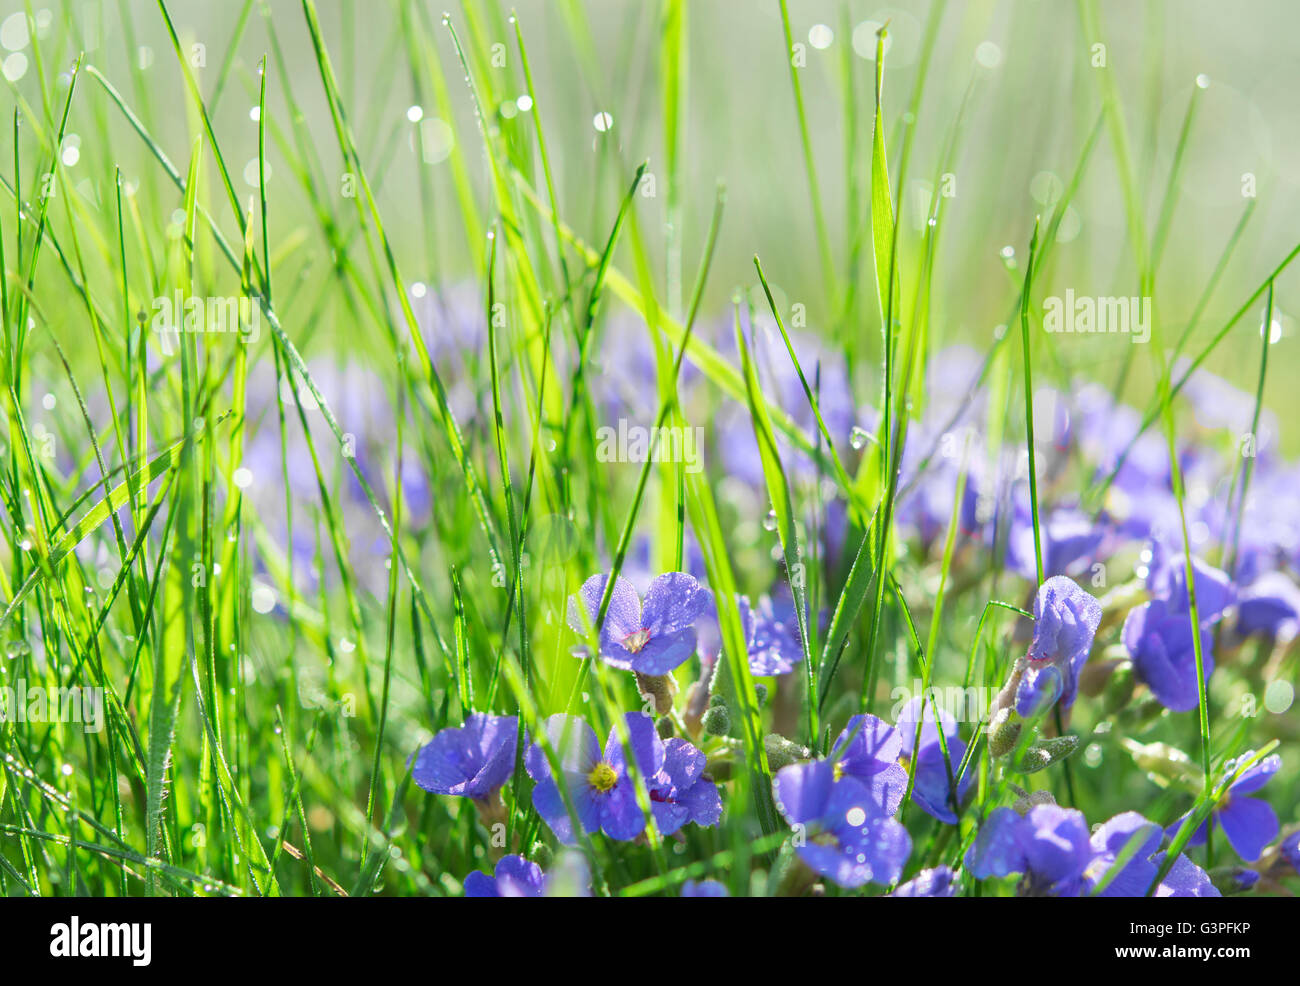 Backlit droplets of morning dew on summer sunlit glade with grass and small blue flowers Stock Photo